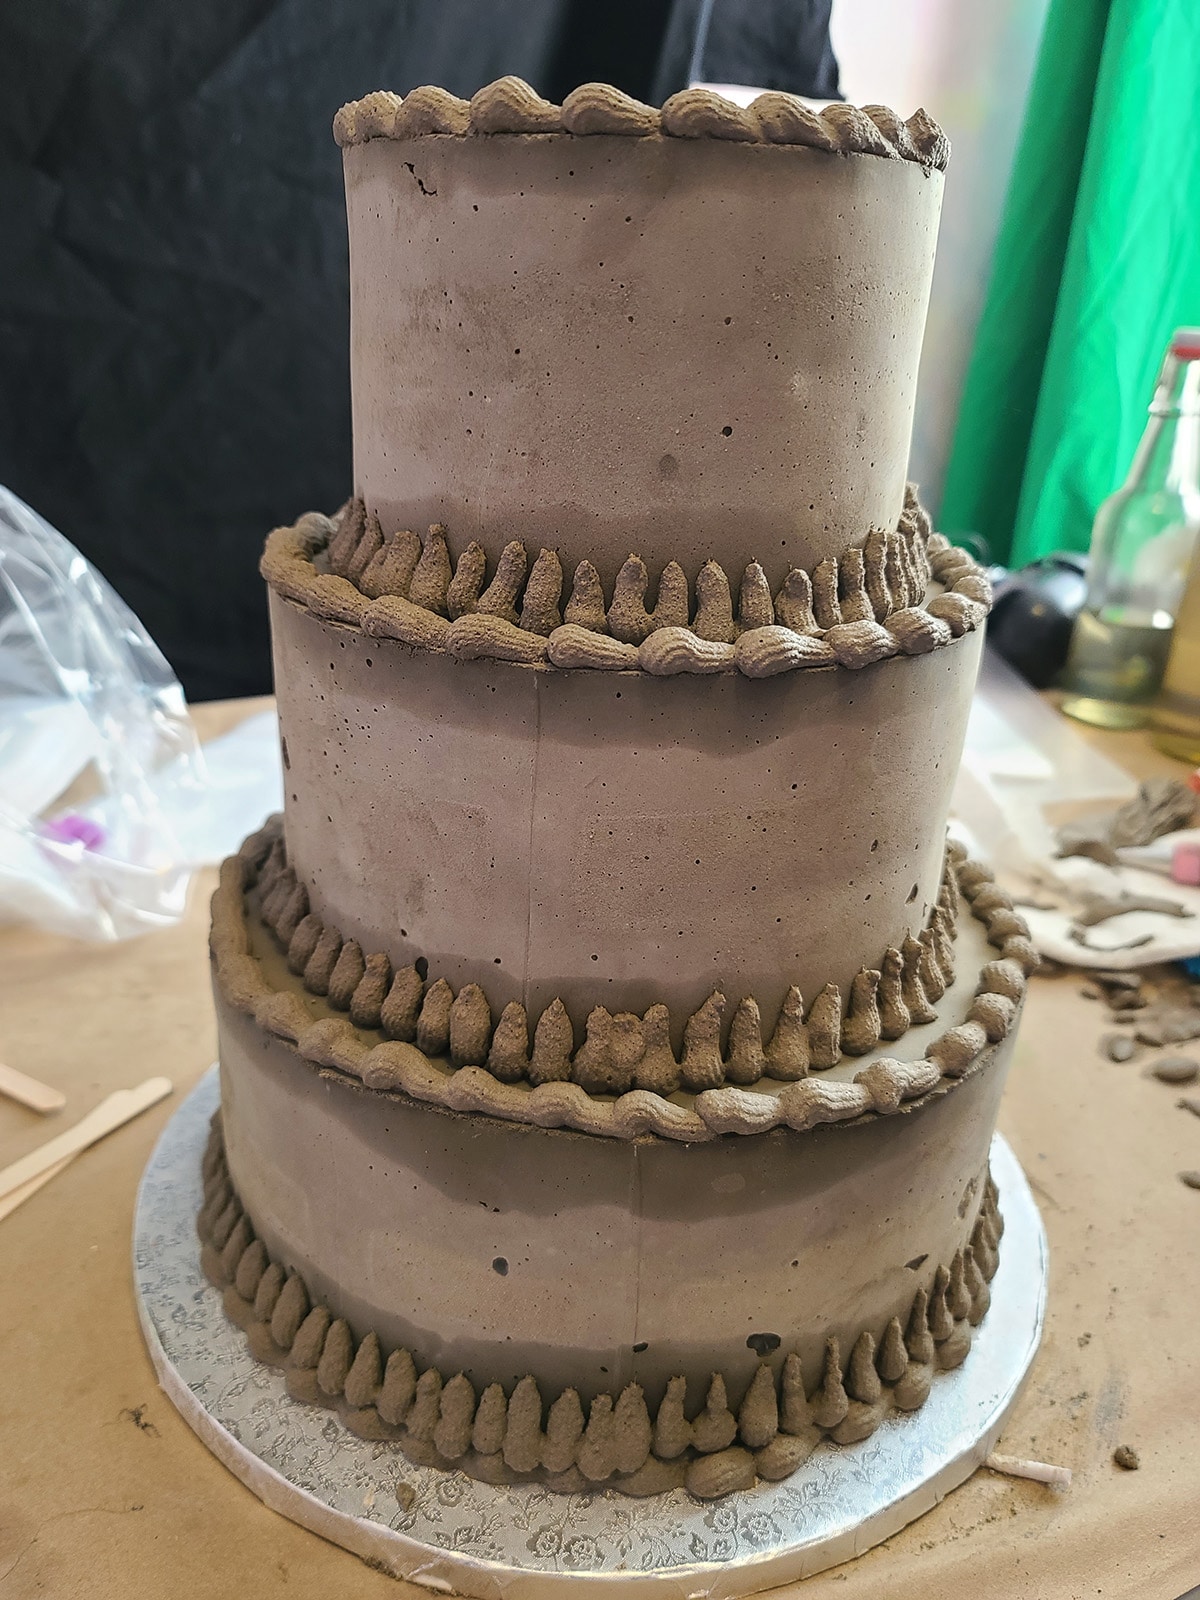 A 3 tiered wedding cake - Lambeth style - completely made from cement.